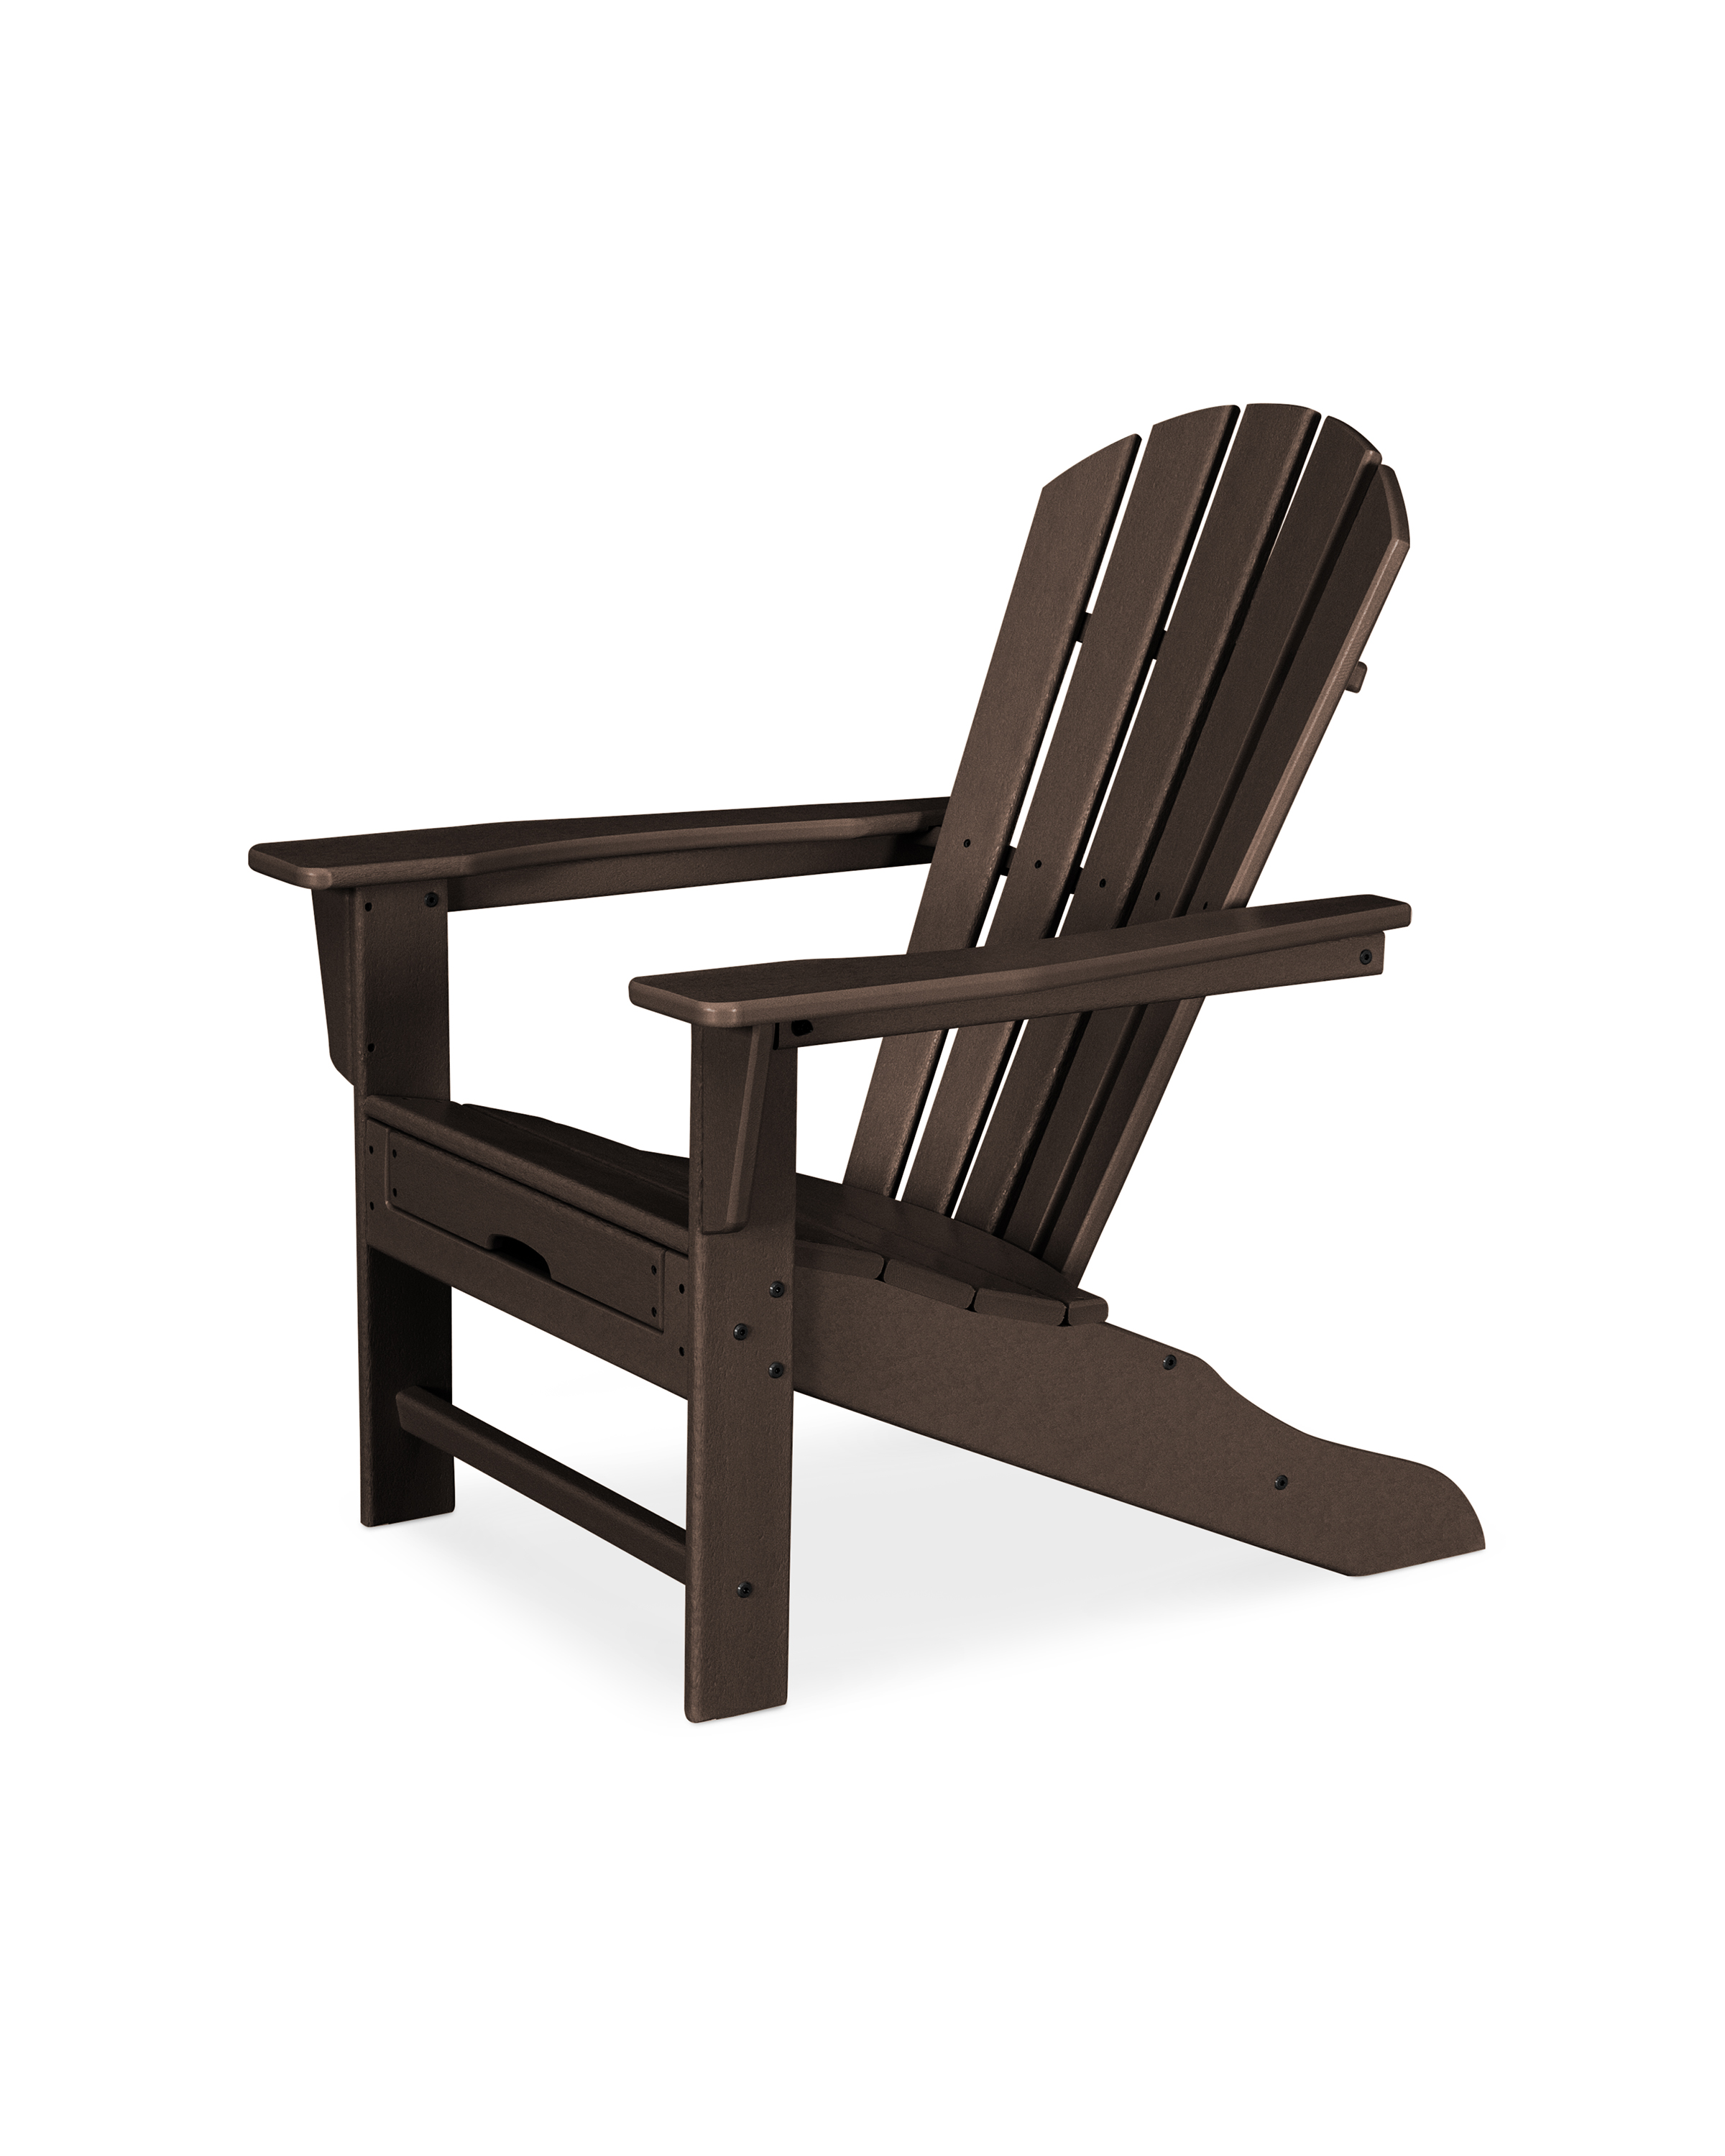 palm coast ultimate adirondack with hideaway ottoman in mahogany product image